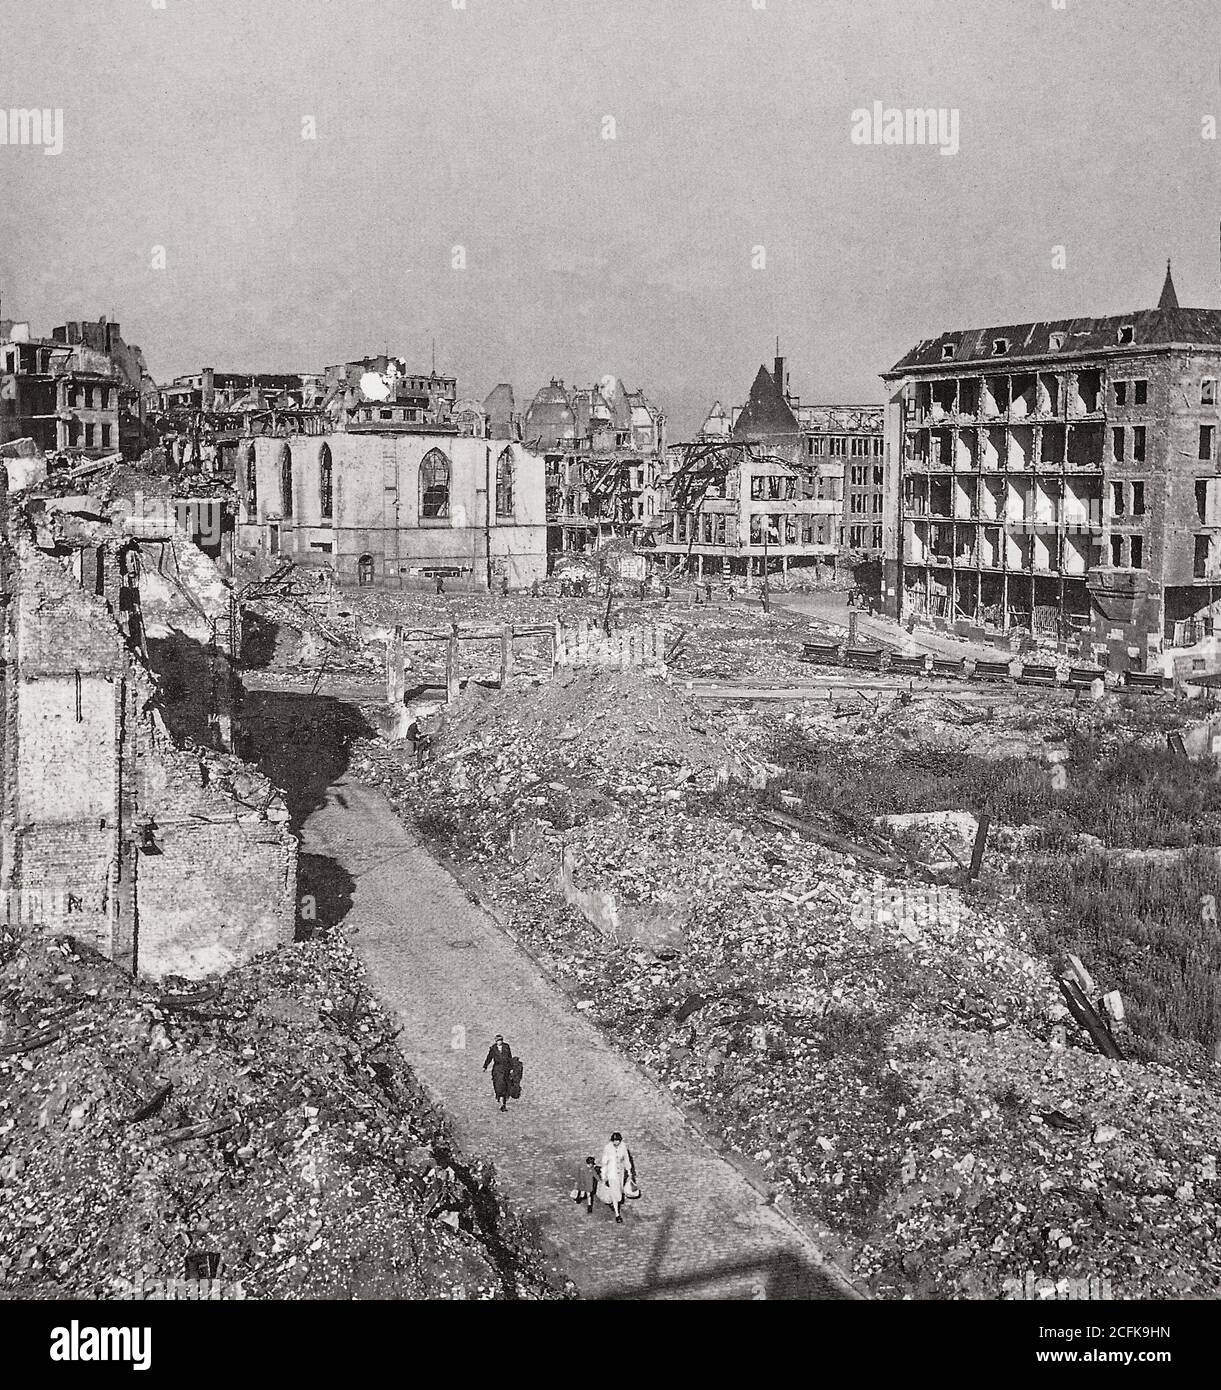 Photographed at the end of the Second World War, the industrial city of Essen. It was a target for allied bombing, with over  270 air raids launched against the city, destroying 90% of the centre and 60% of the suburbs. Stock Photo